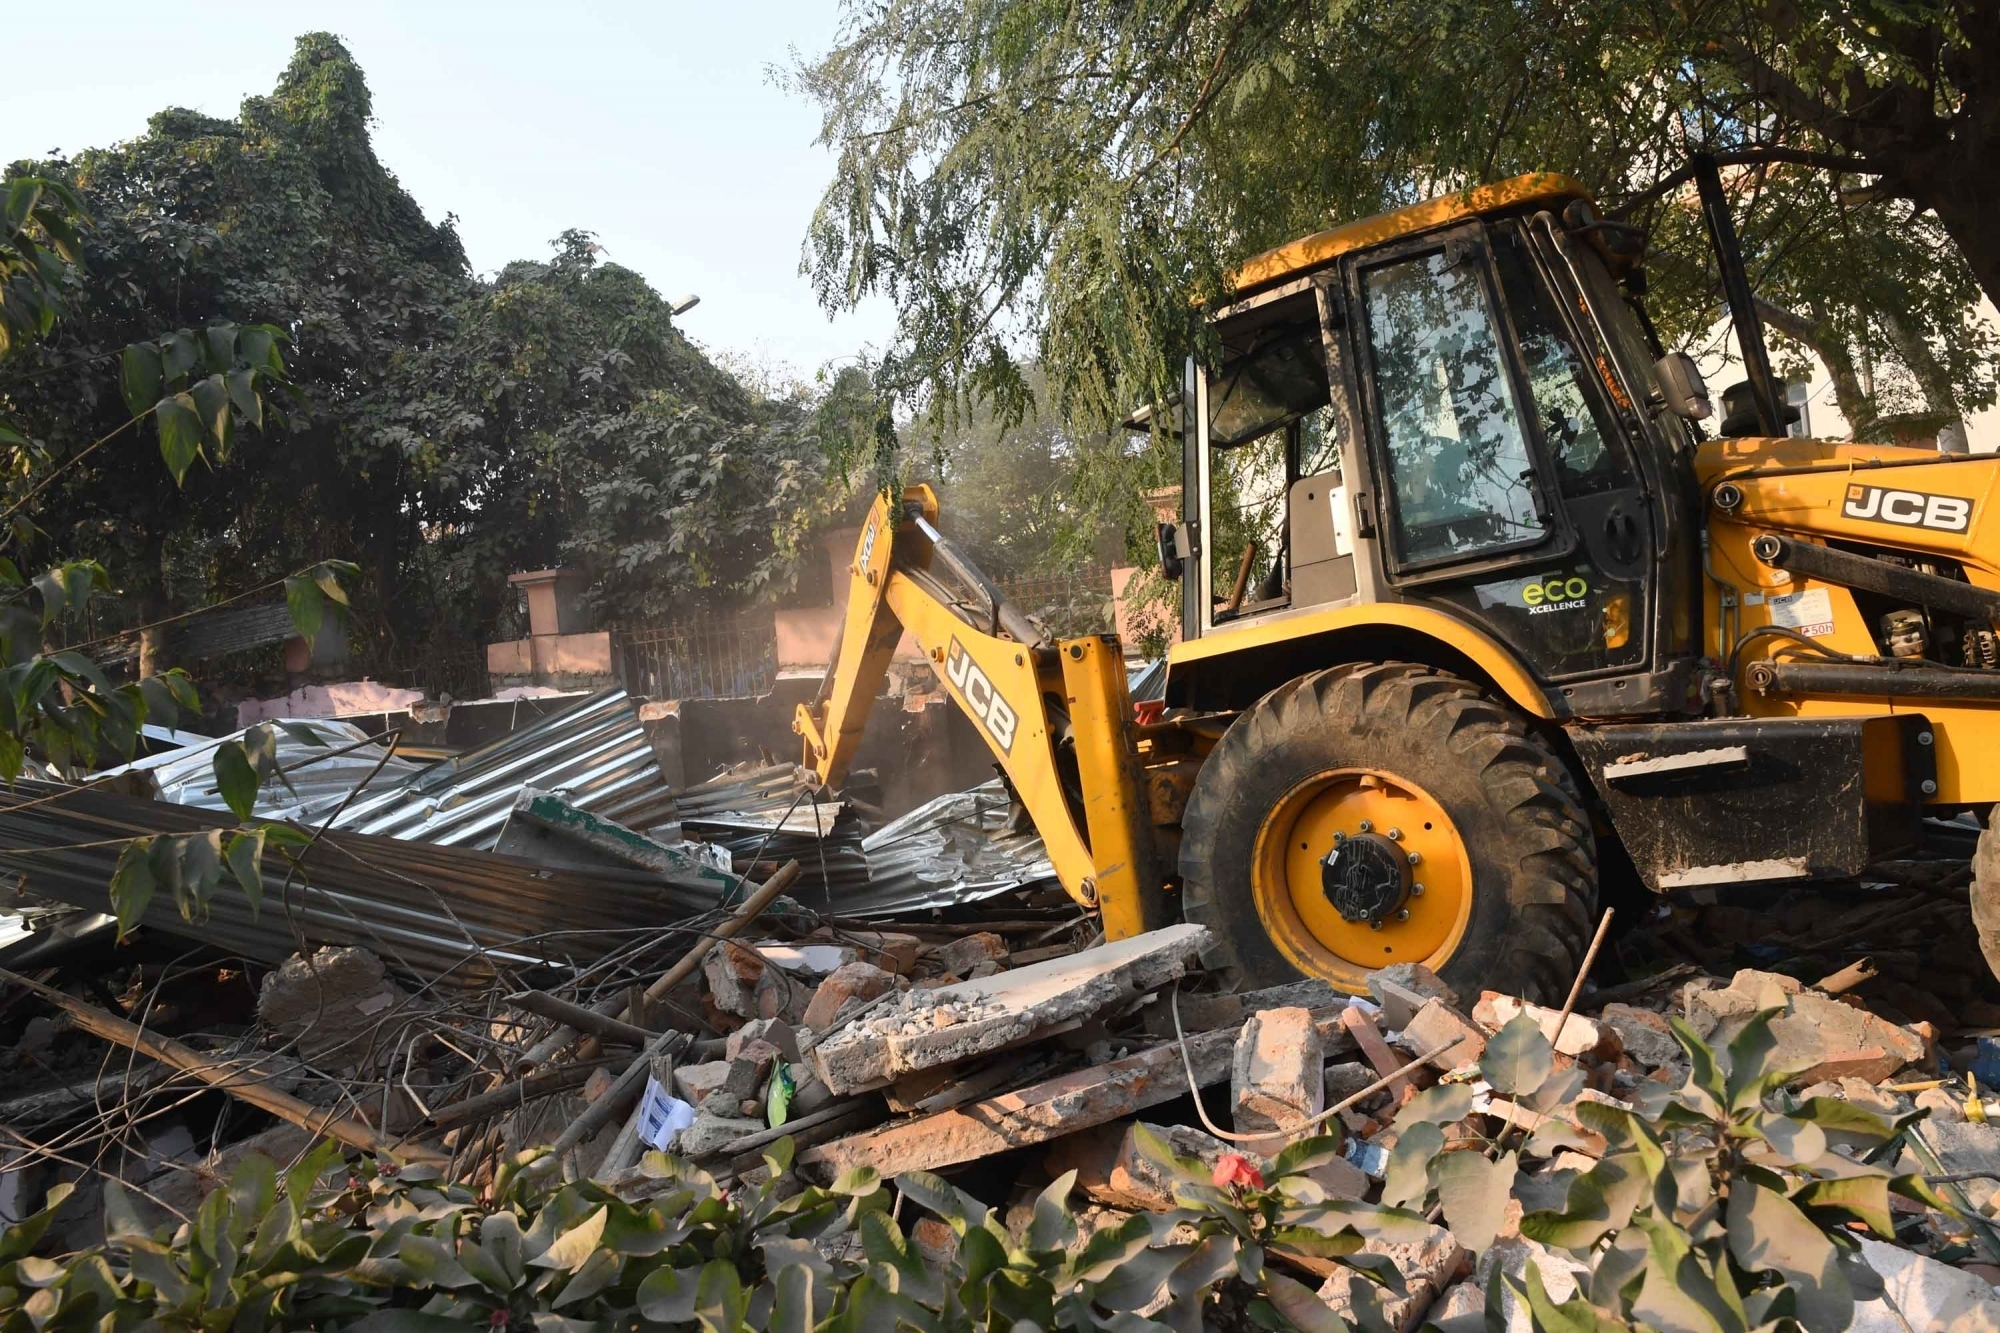 Anti-encroachment drive in Delhi's Mangolpuri canceled due to unavailability of police force
